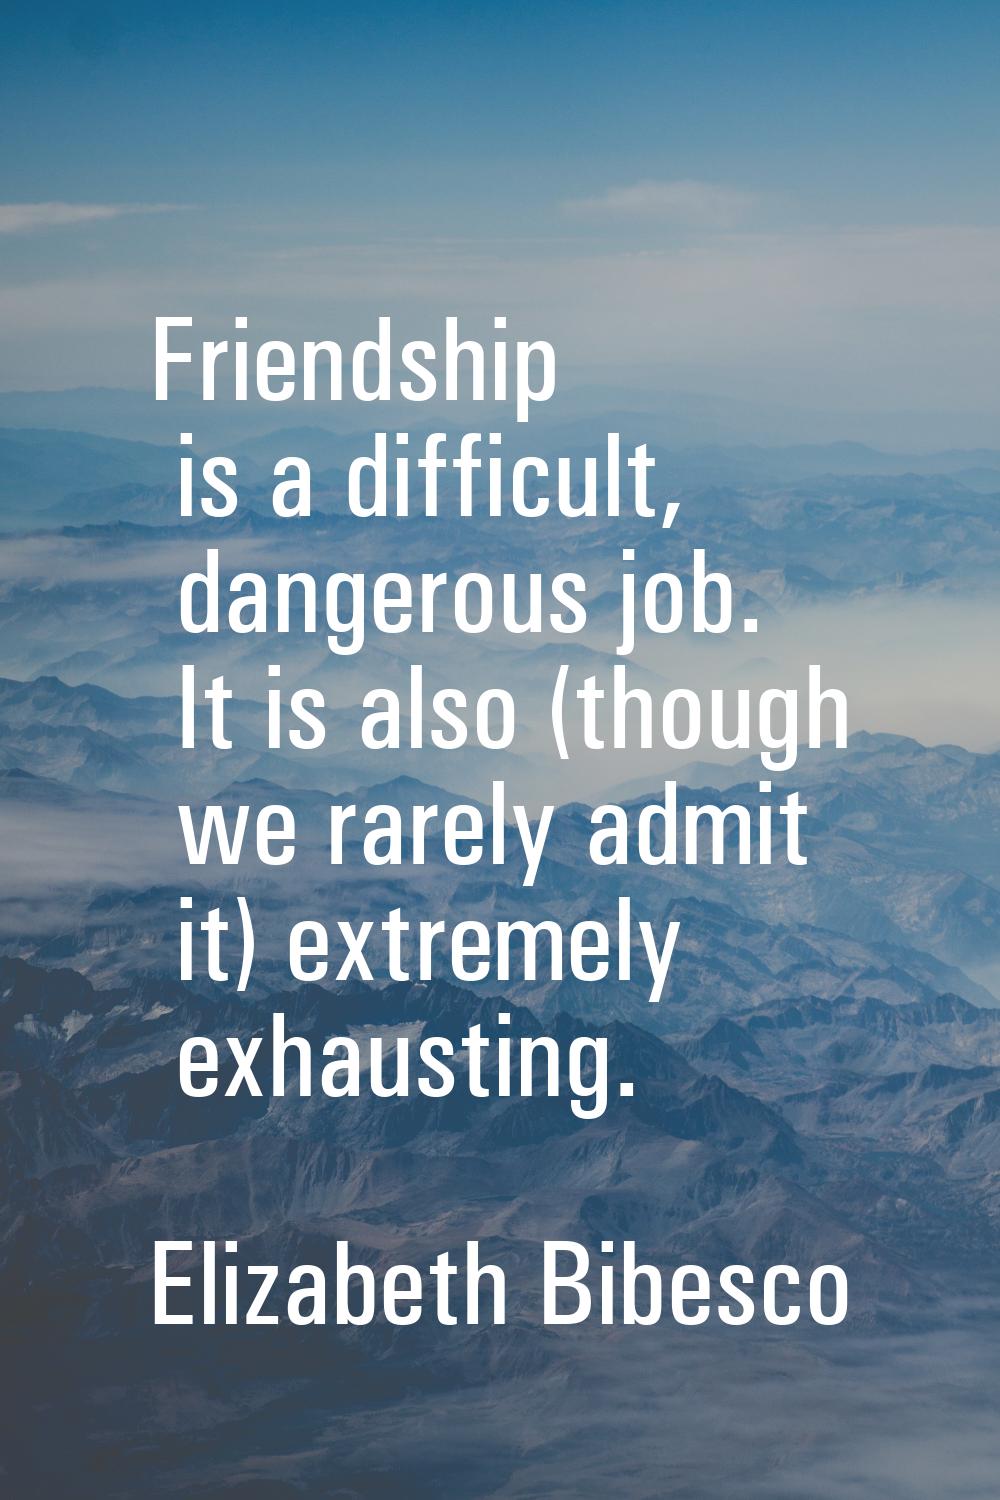 Friendship is a difficult, dangerous job. It is also (though we rarely admit it) extremely exhausti